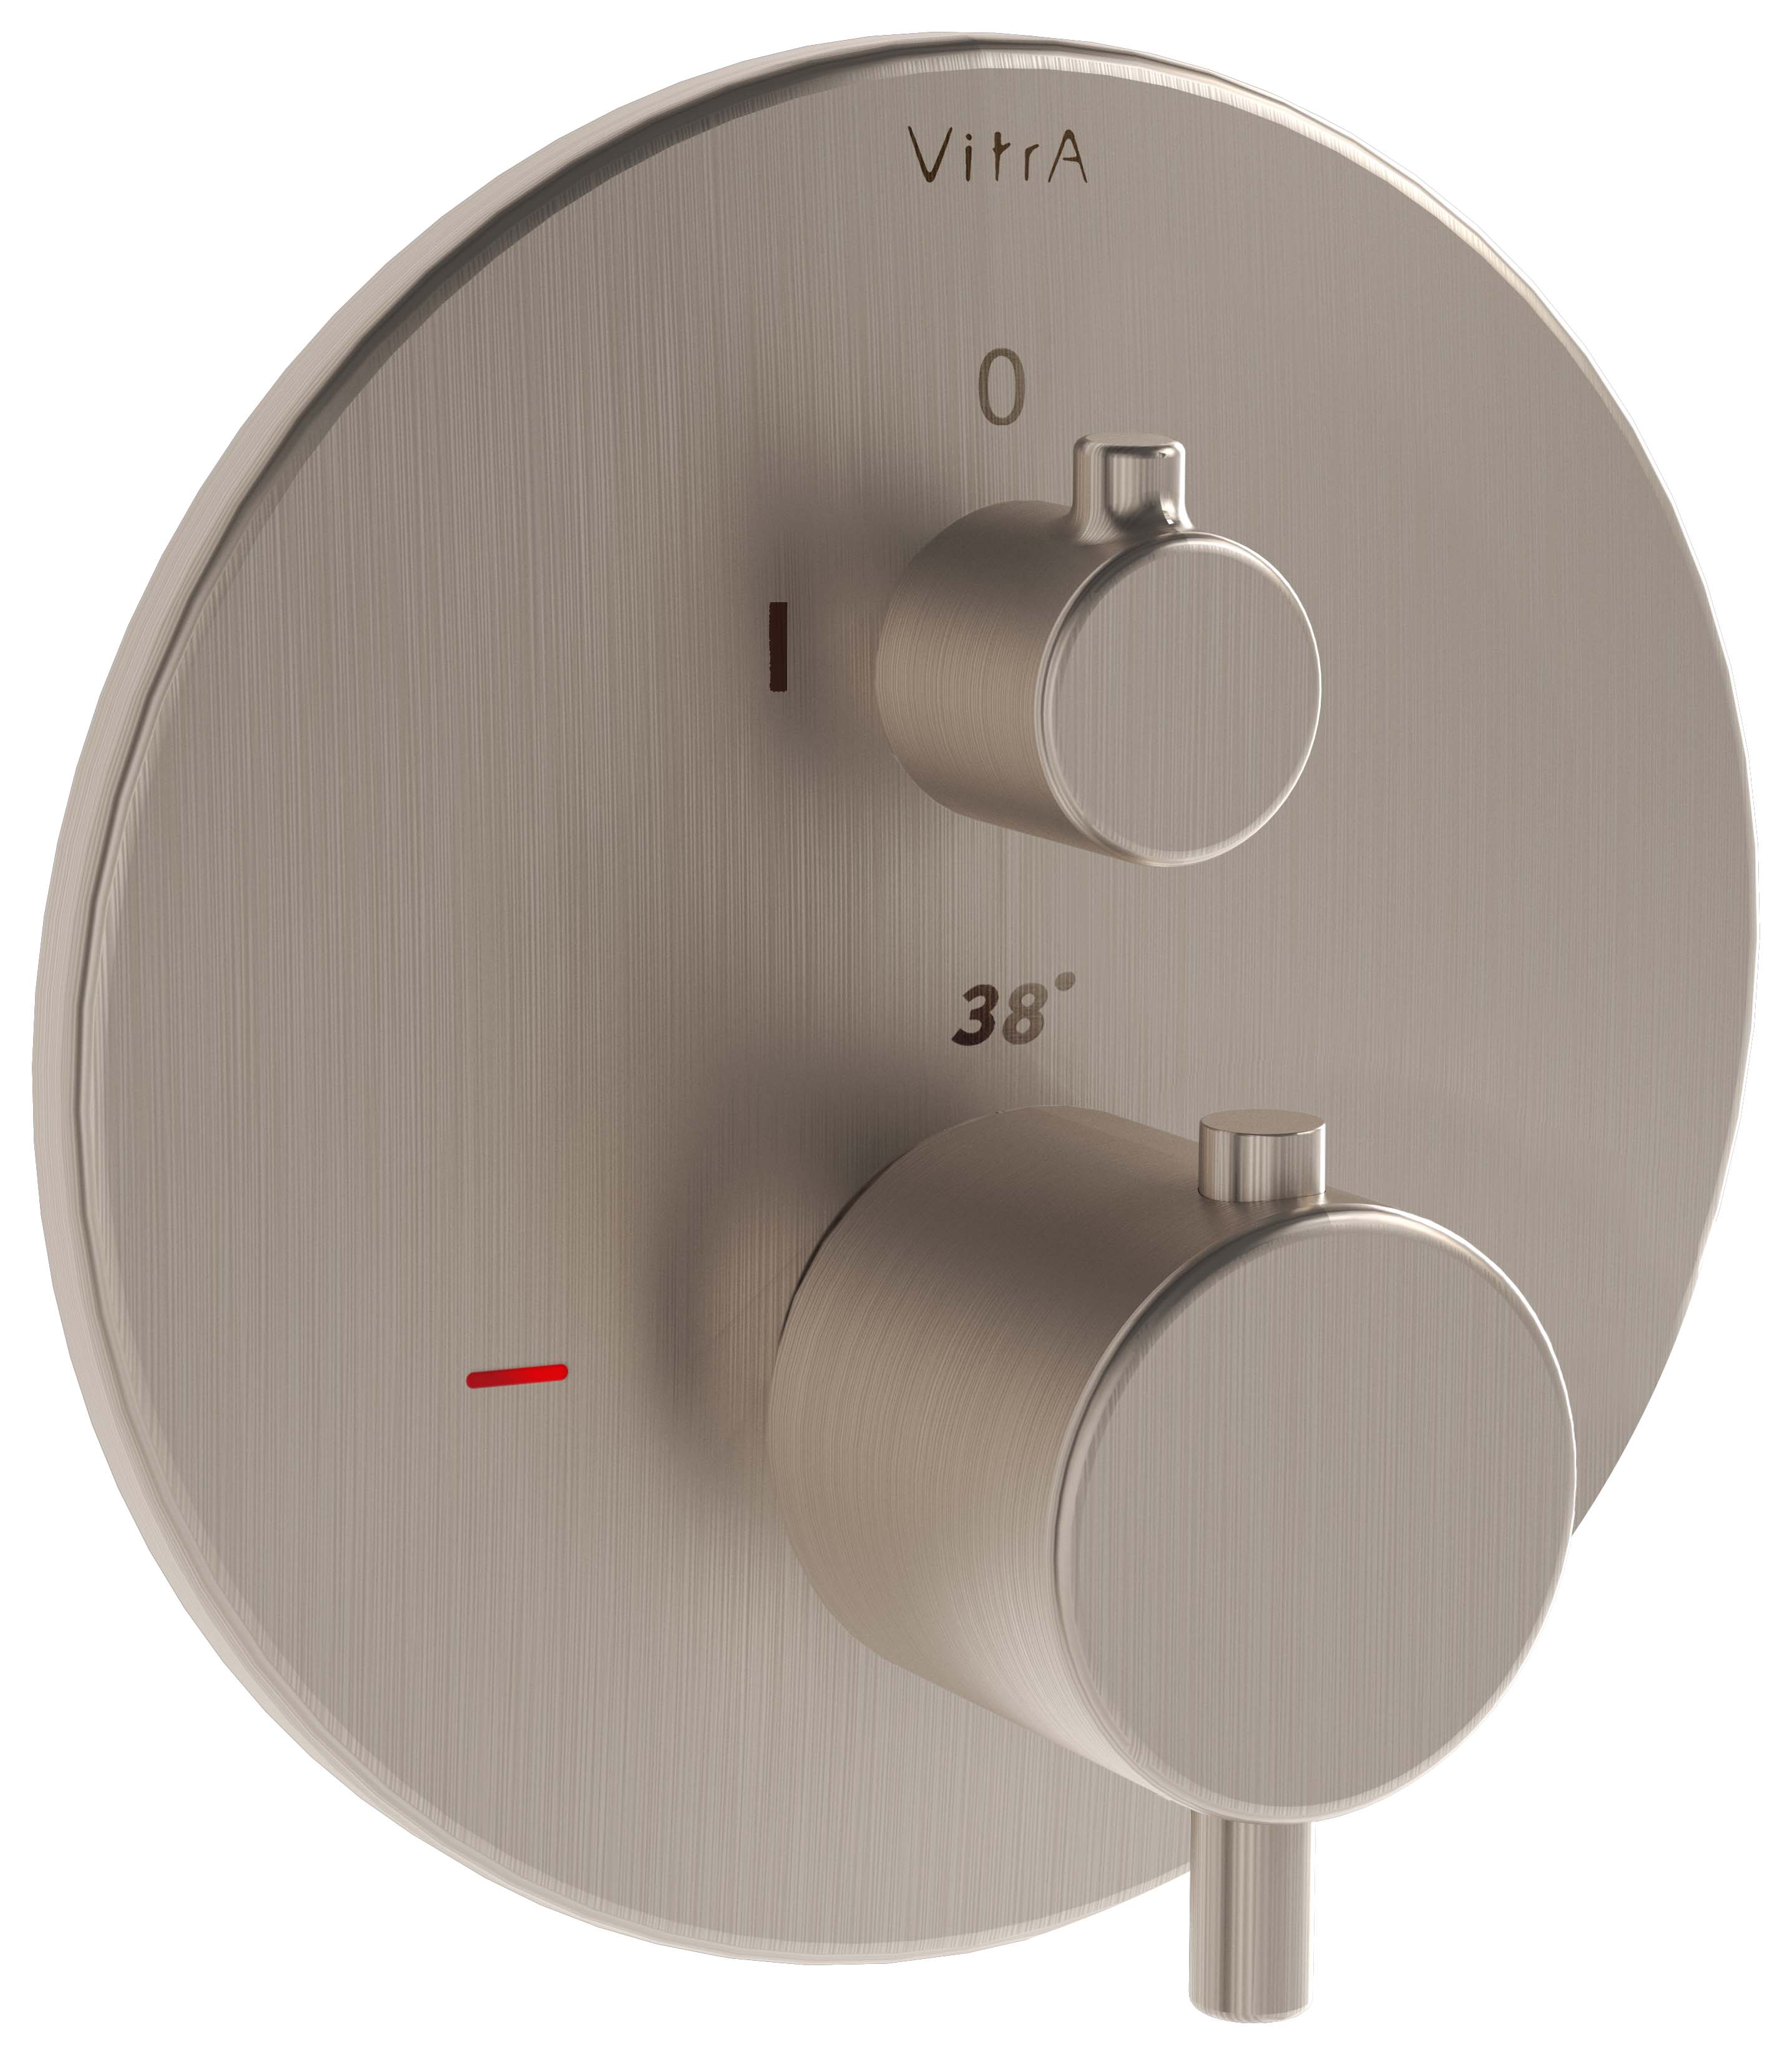 Image of VitrA Origin Round Built-In 1 Way Thermostatic Bath & Shower Mixer Valve - Brushed Nickel